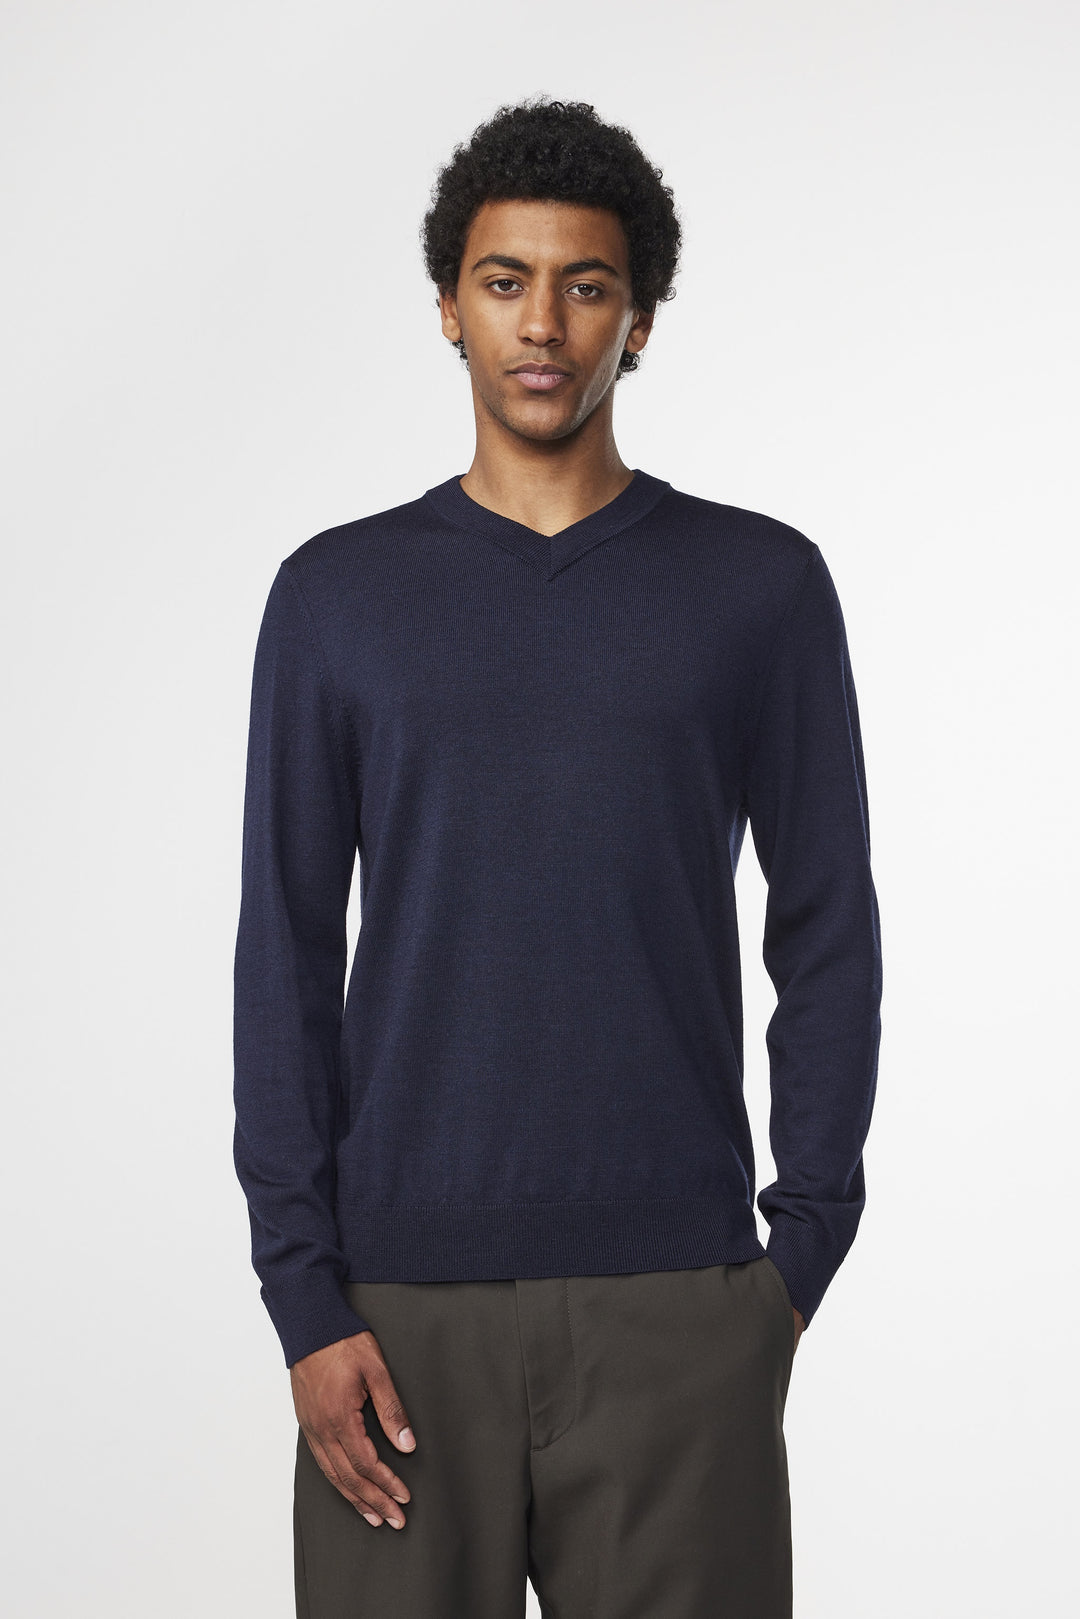 NN07 Sergio 6605 V-Neck Sweater in Navy Multi | Buster McGee